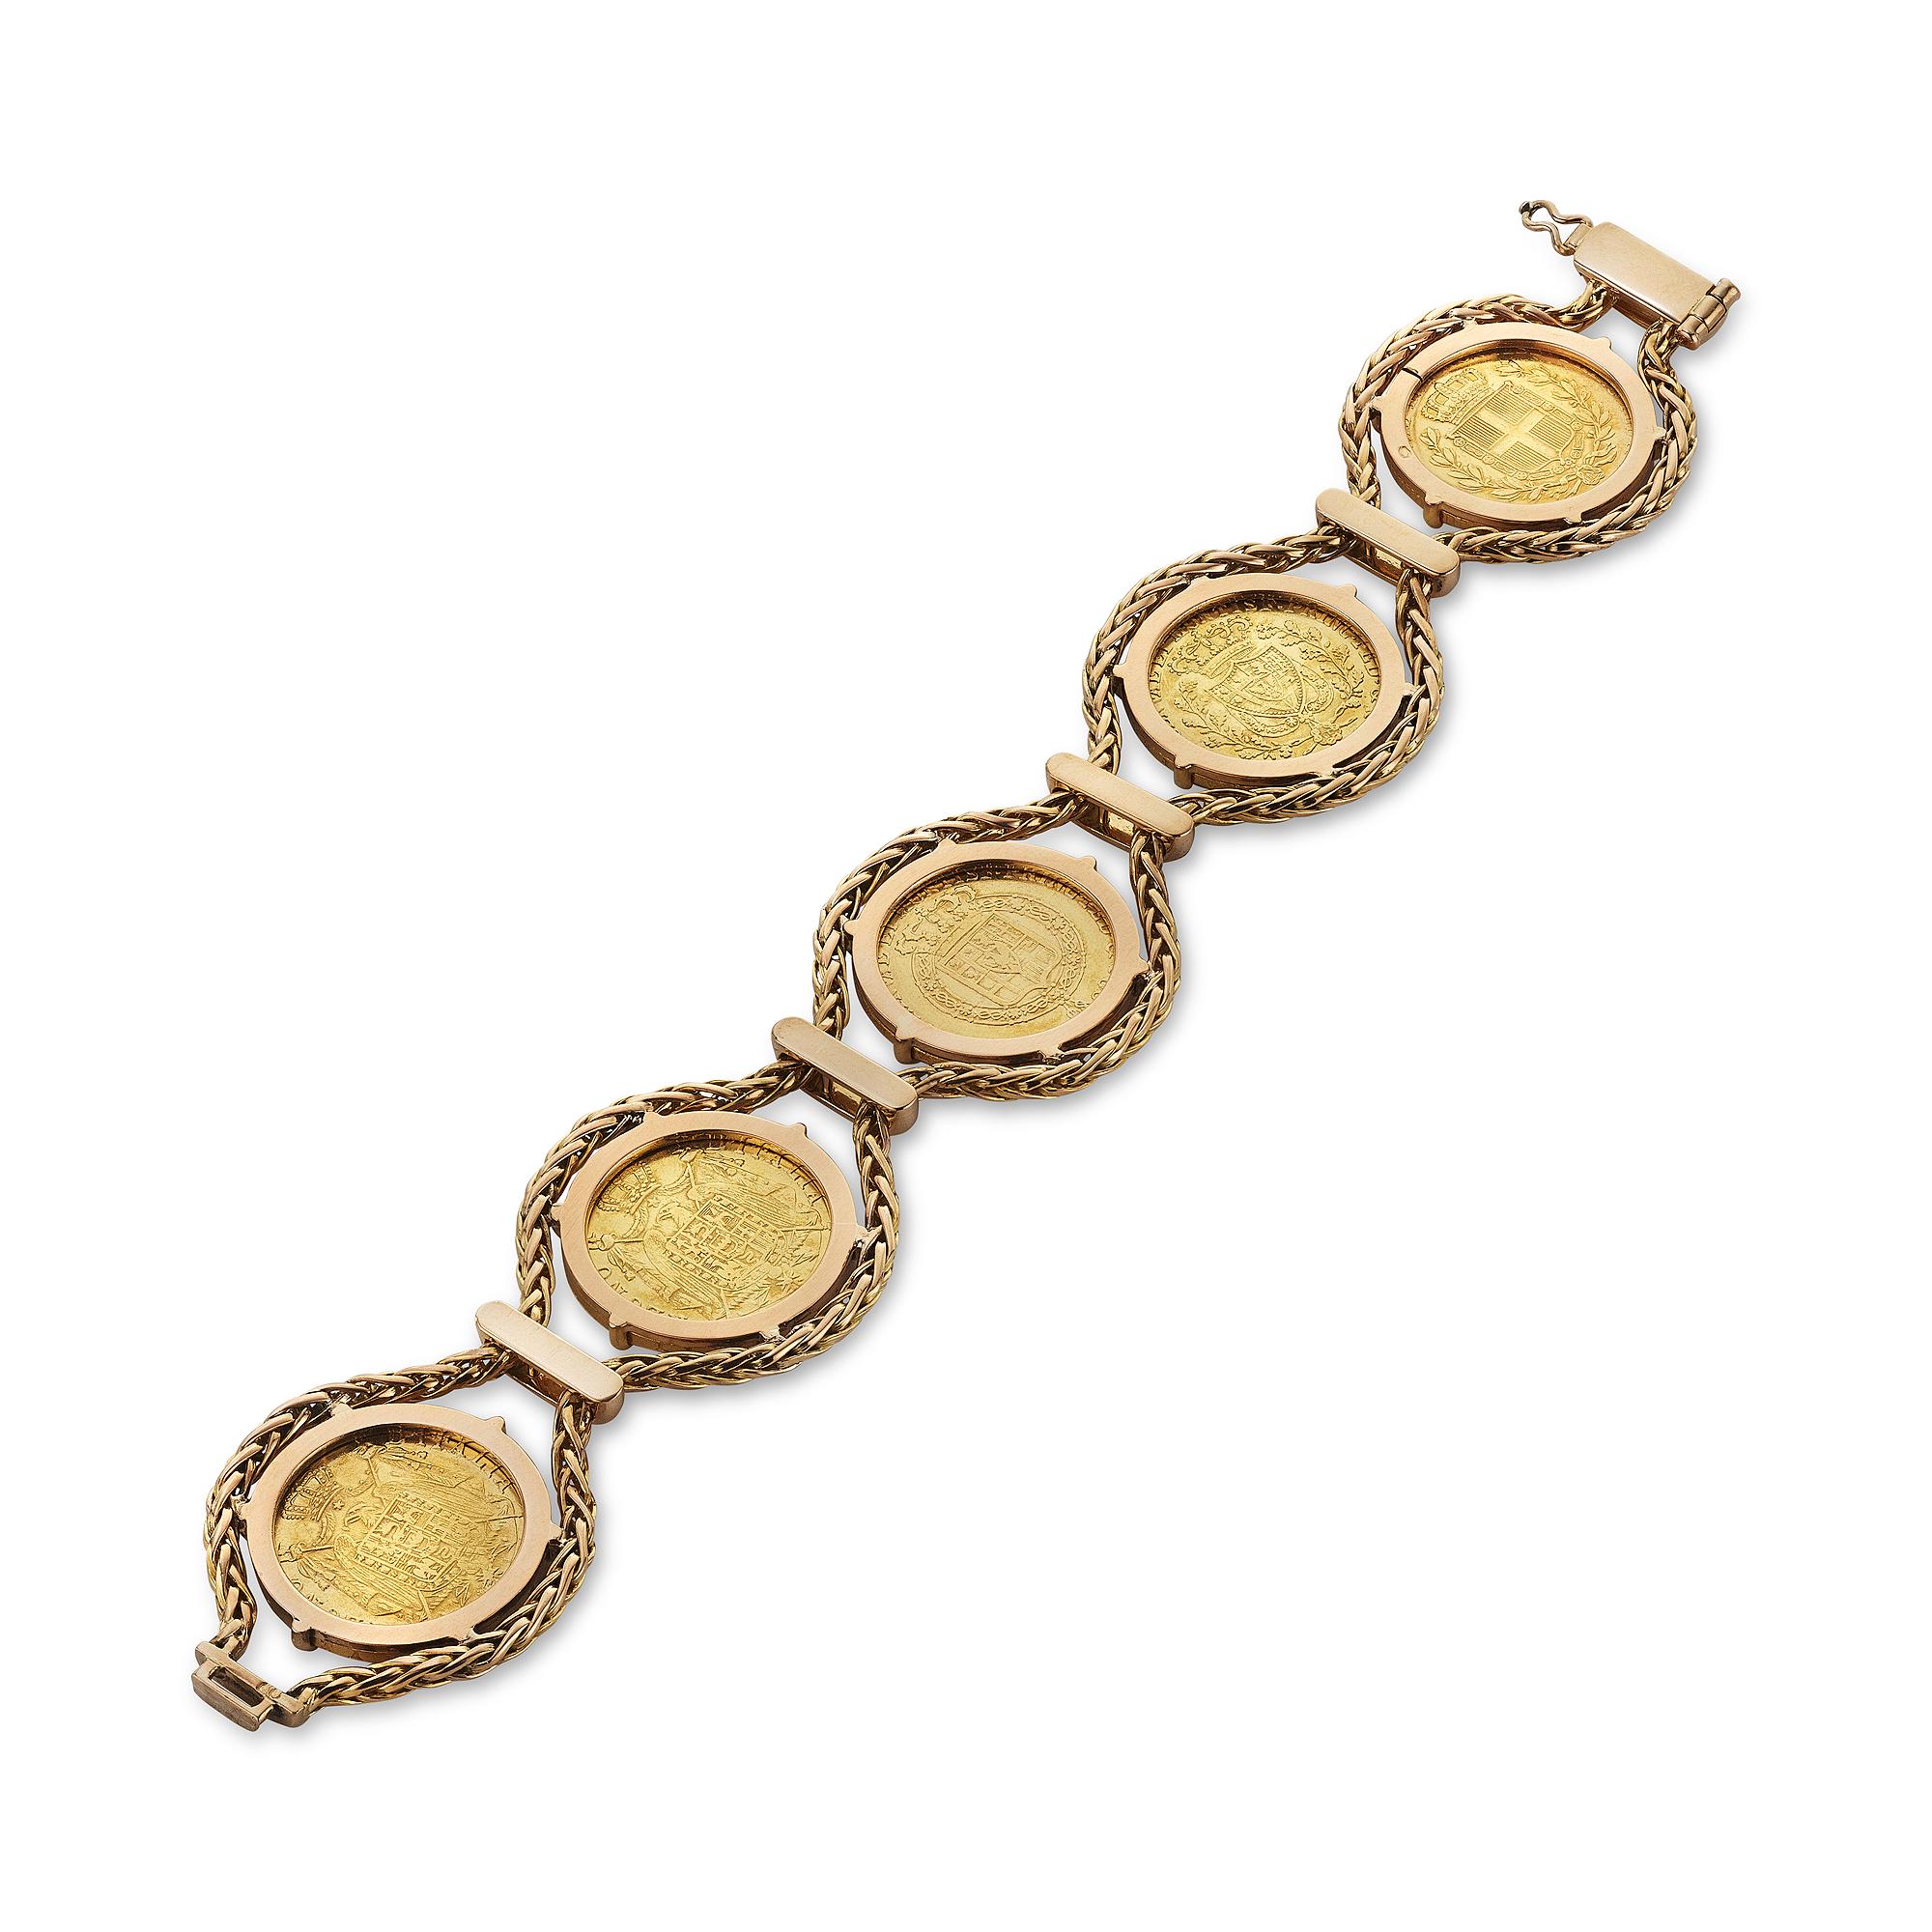 Got any spare change?  You will with this 19th century French gold coin bracelet.  With five 22 karat gold coins dating from 1812 to 1847, connected with an 18 karat yellow gold woven chain from the 1960's, this vintage bracelet will always keep you